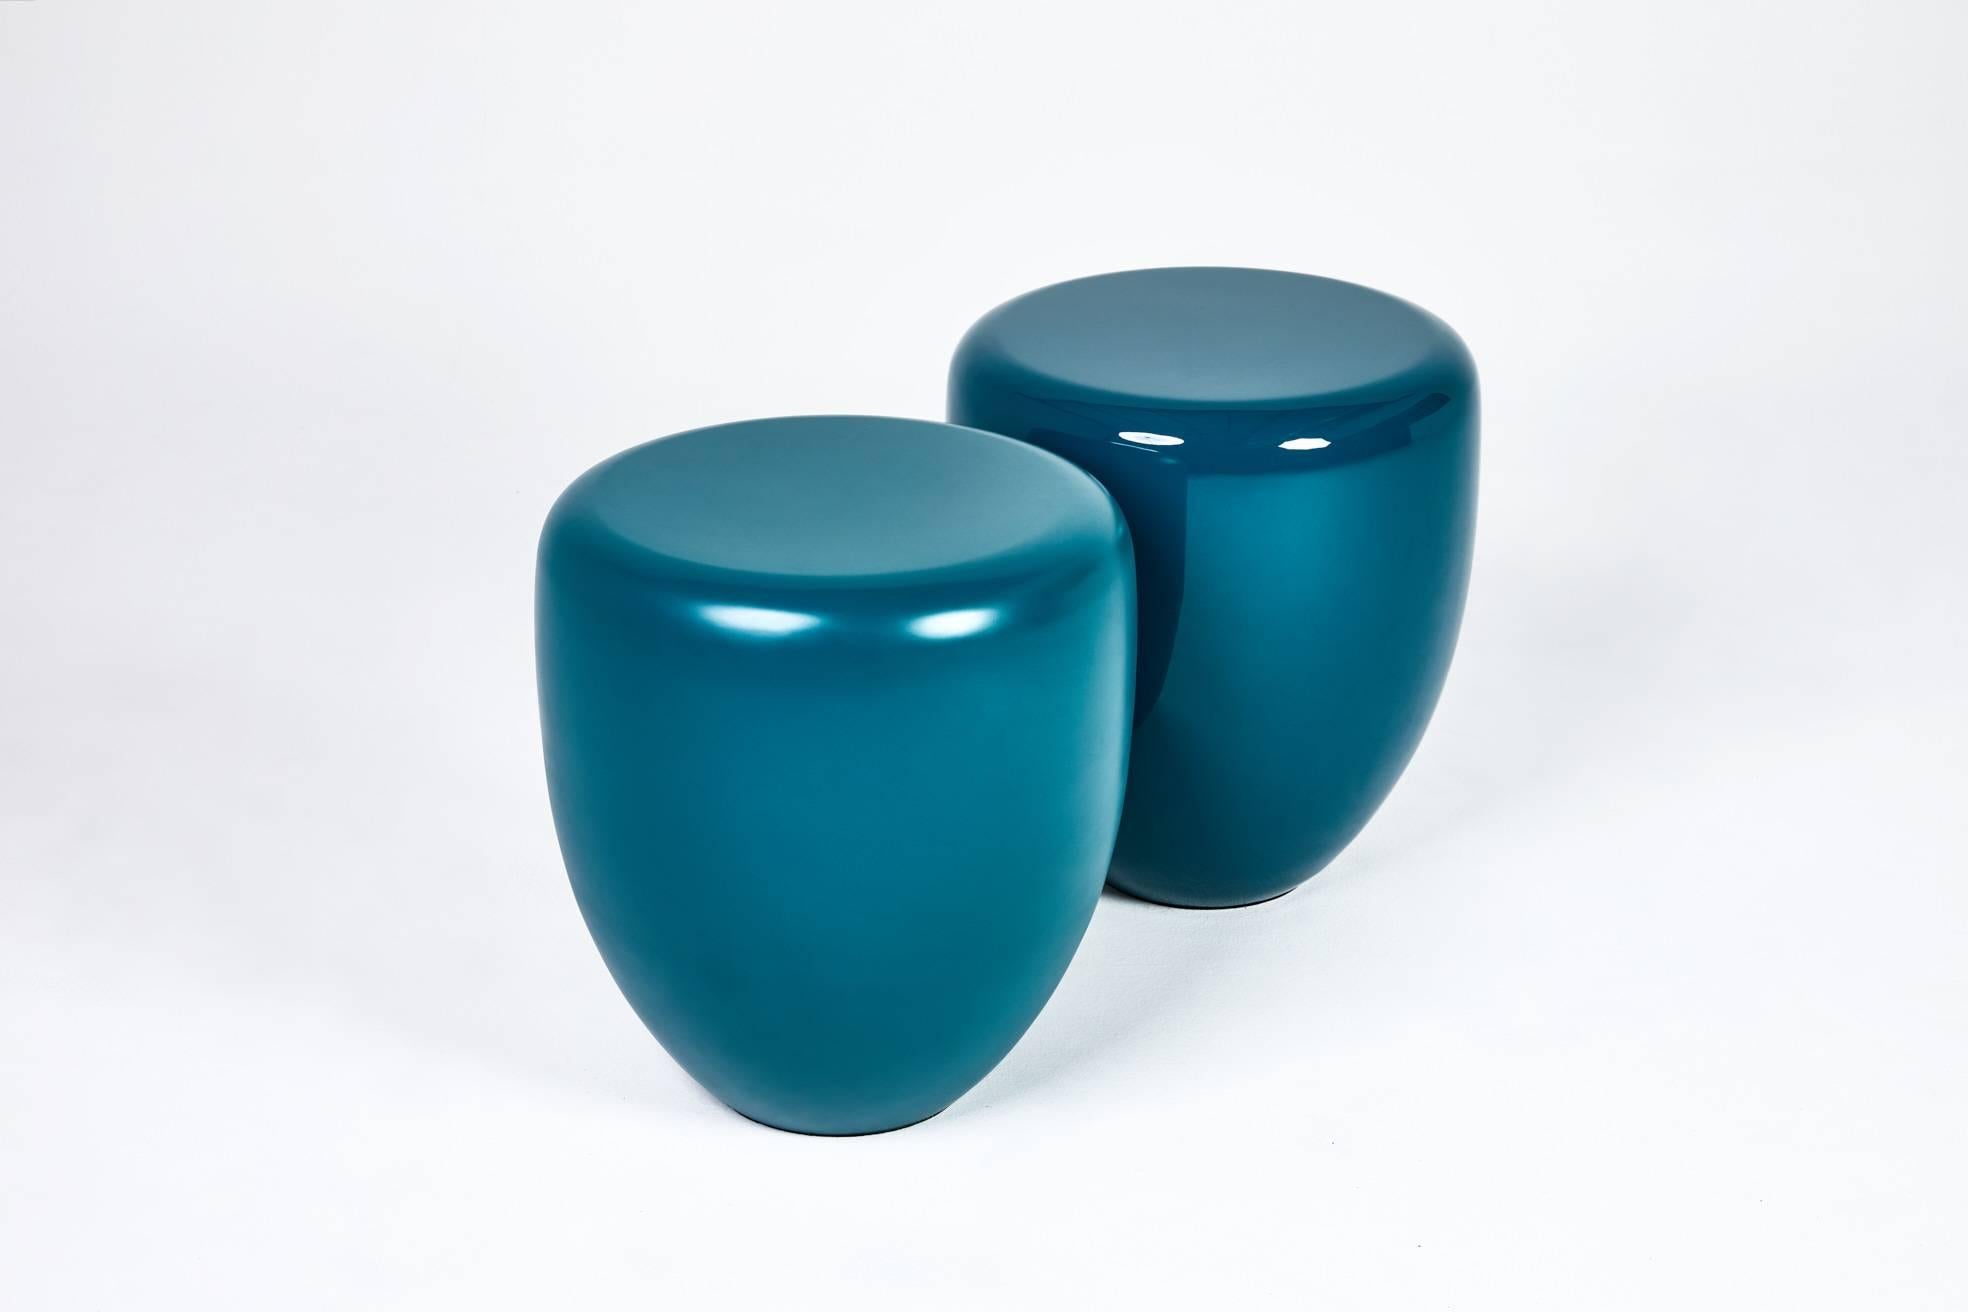 Wood Side Table, Peacock Blue DOT by Reda Amalou, 2018 - Glossy or mate lacquer For Sale